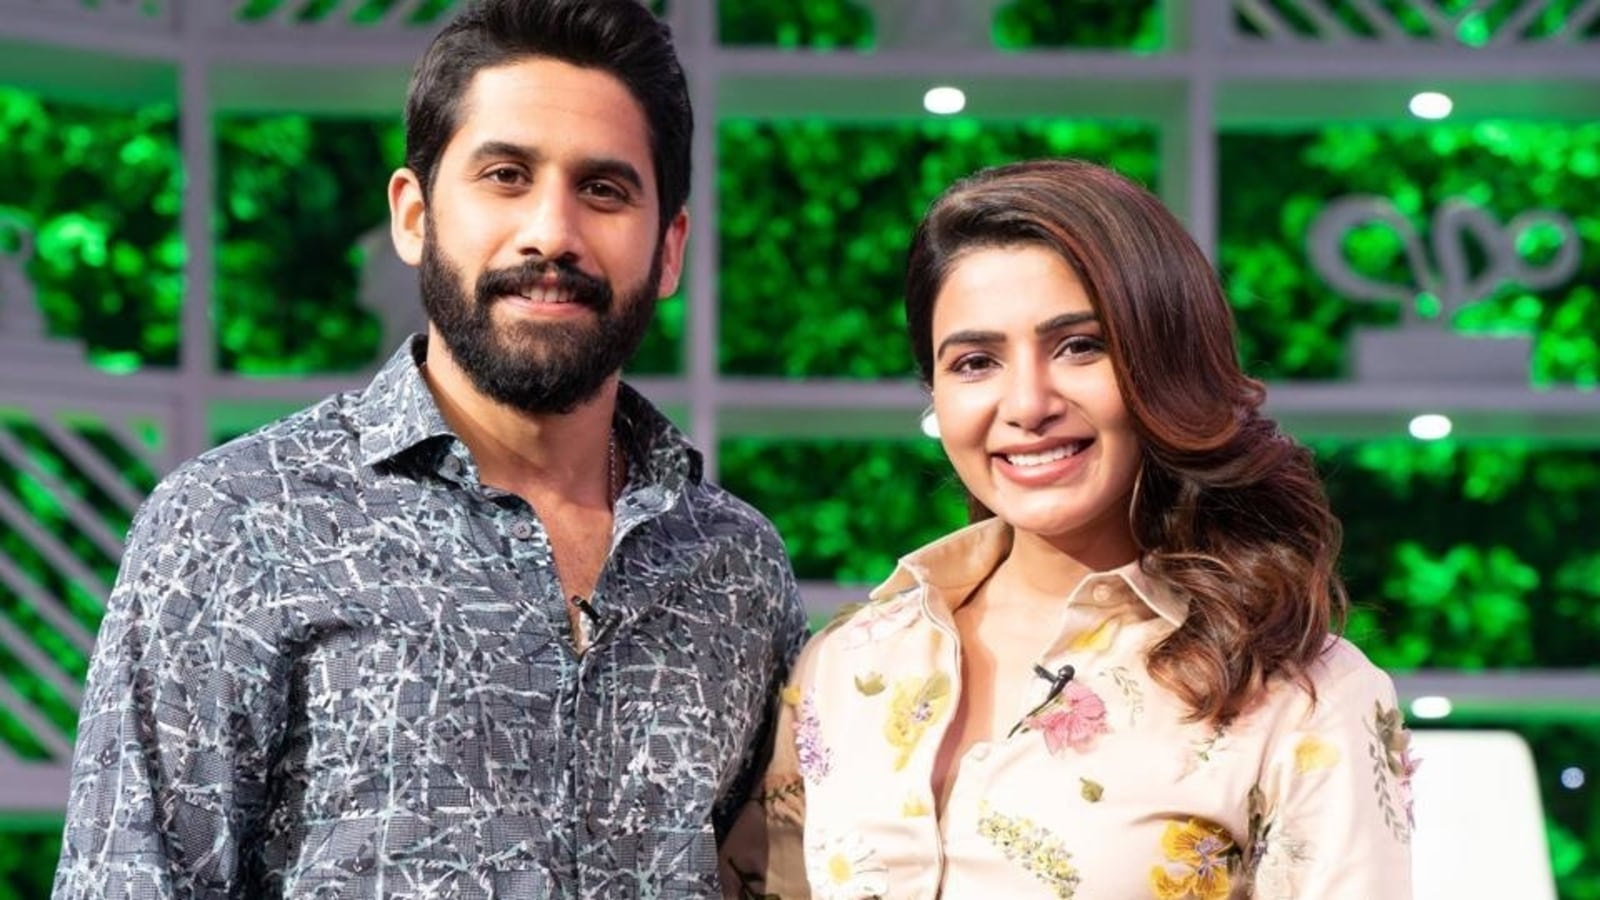 Samantha Ruth Prabhu on being trolled after split from Naga Chaitanya: 'I  remember crumbling and being sad' - Hindustan Times